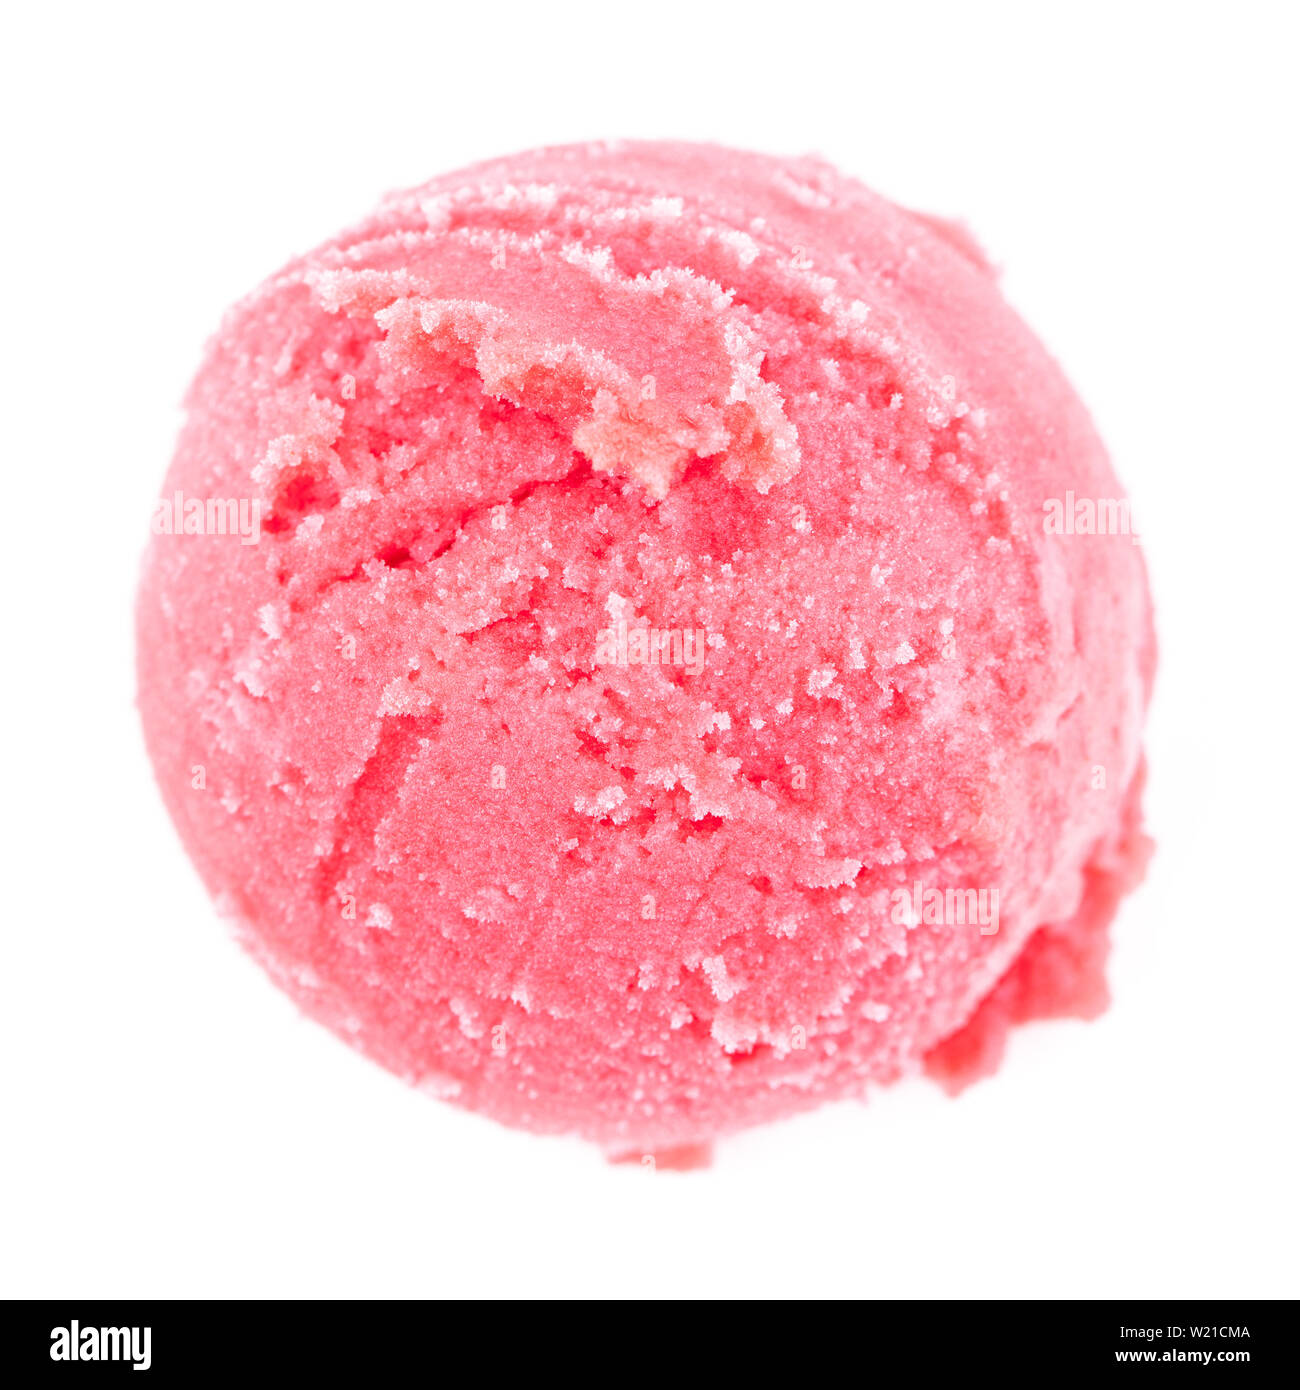 https://c8.alamy.com/comp/W21CMA/single-scoop-of-red-cherry-sorbet-from-above-on-a-white-background-W21CMA.jpg